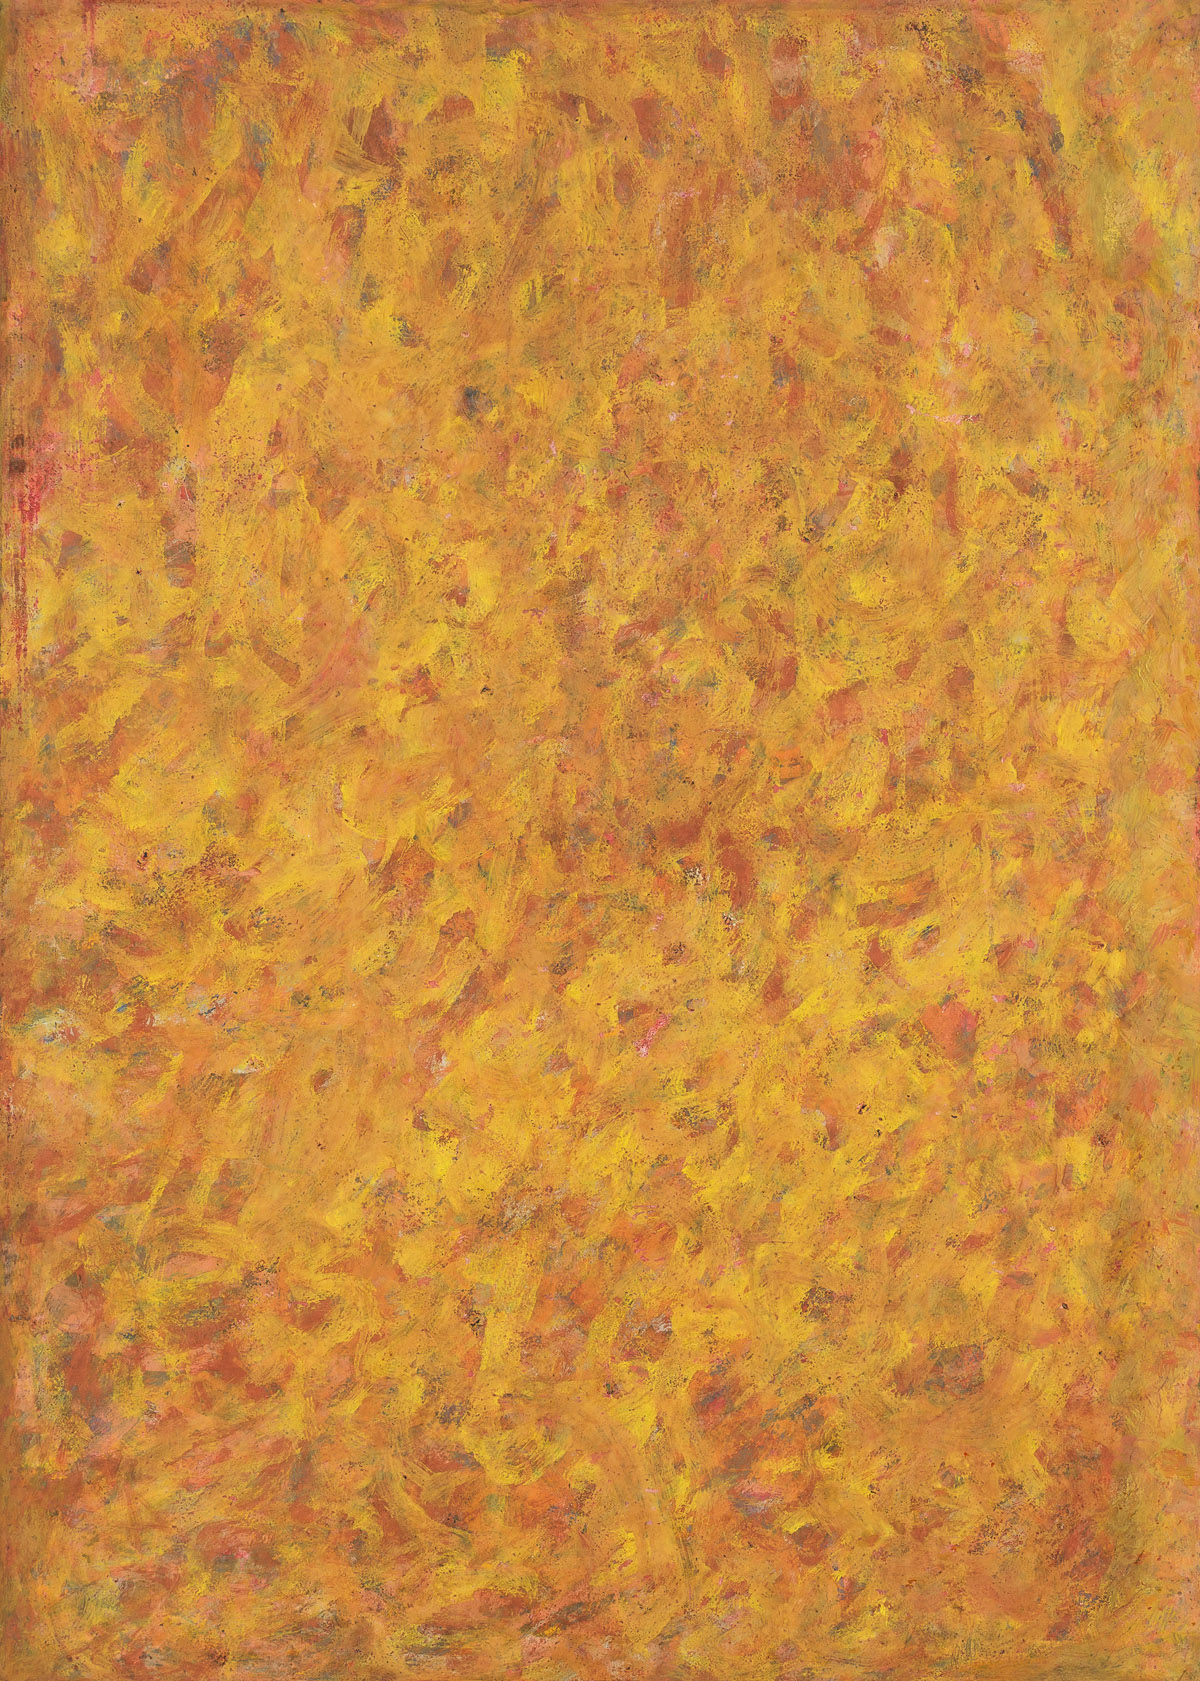 BEAUFORD DELANEY (1901 - 1979) Untitled (Composition in Yellow, Orange and Red).